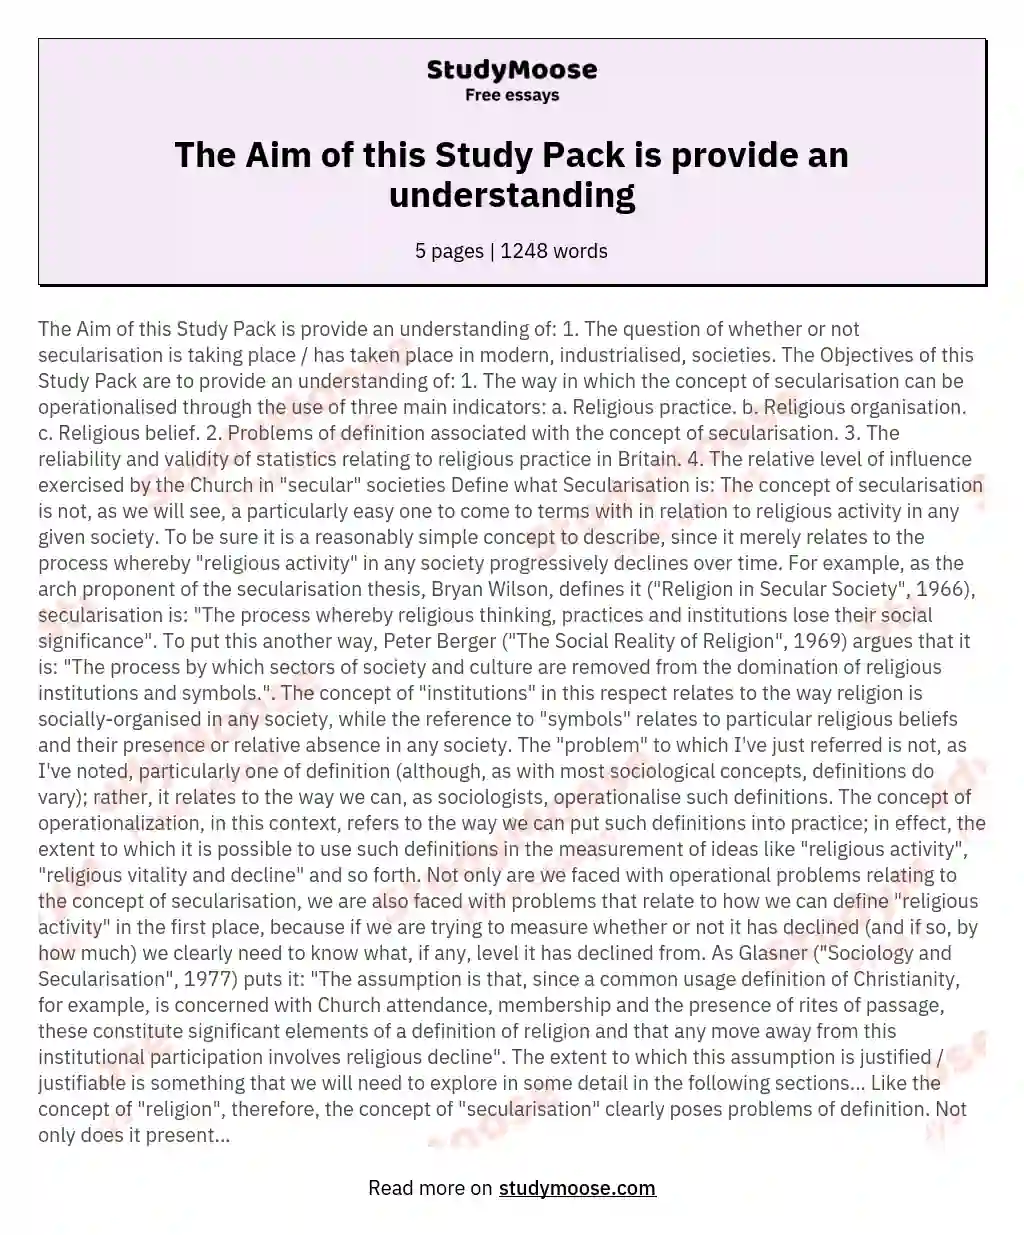 The Aim of this Study Pack is provide an understanding essay